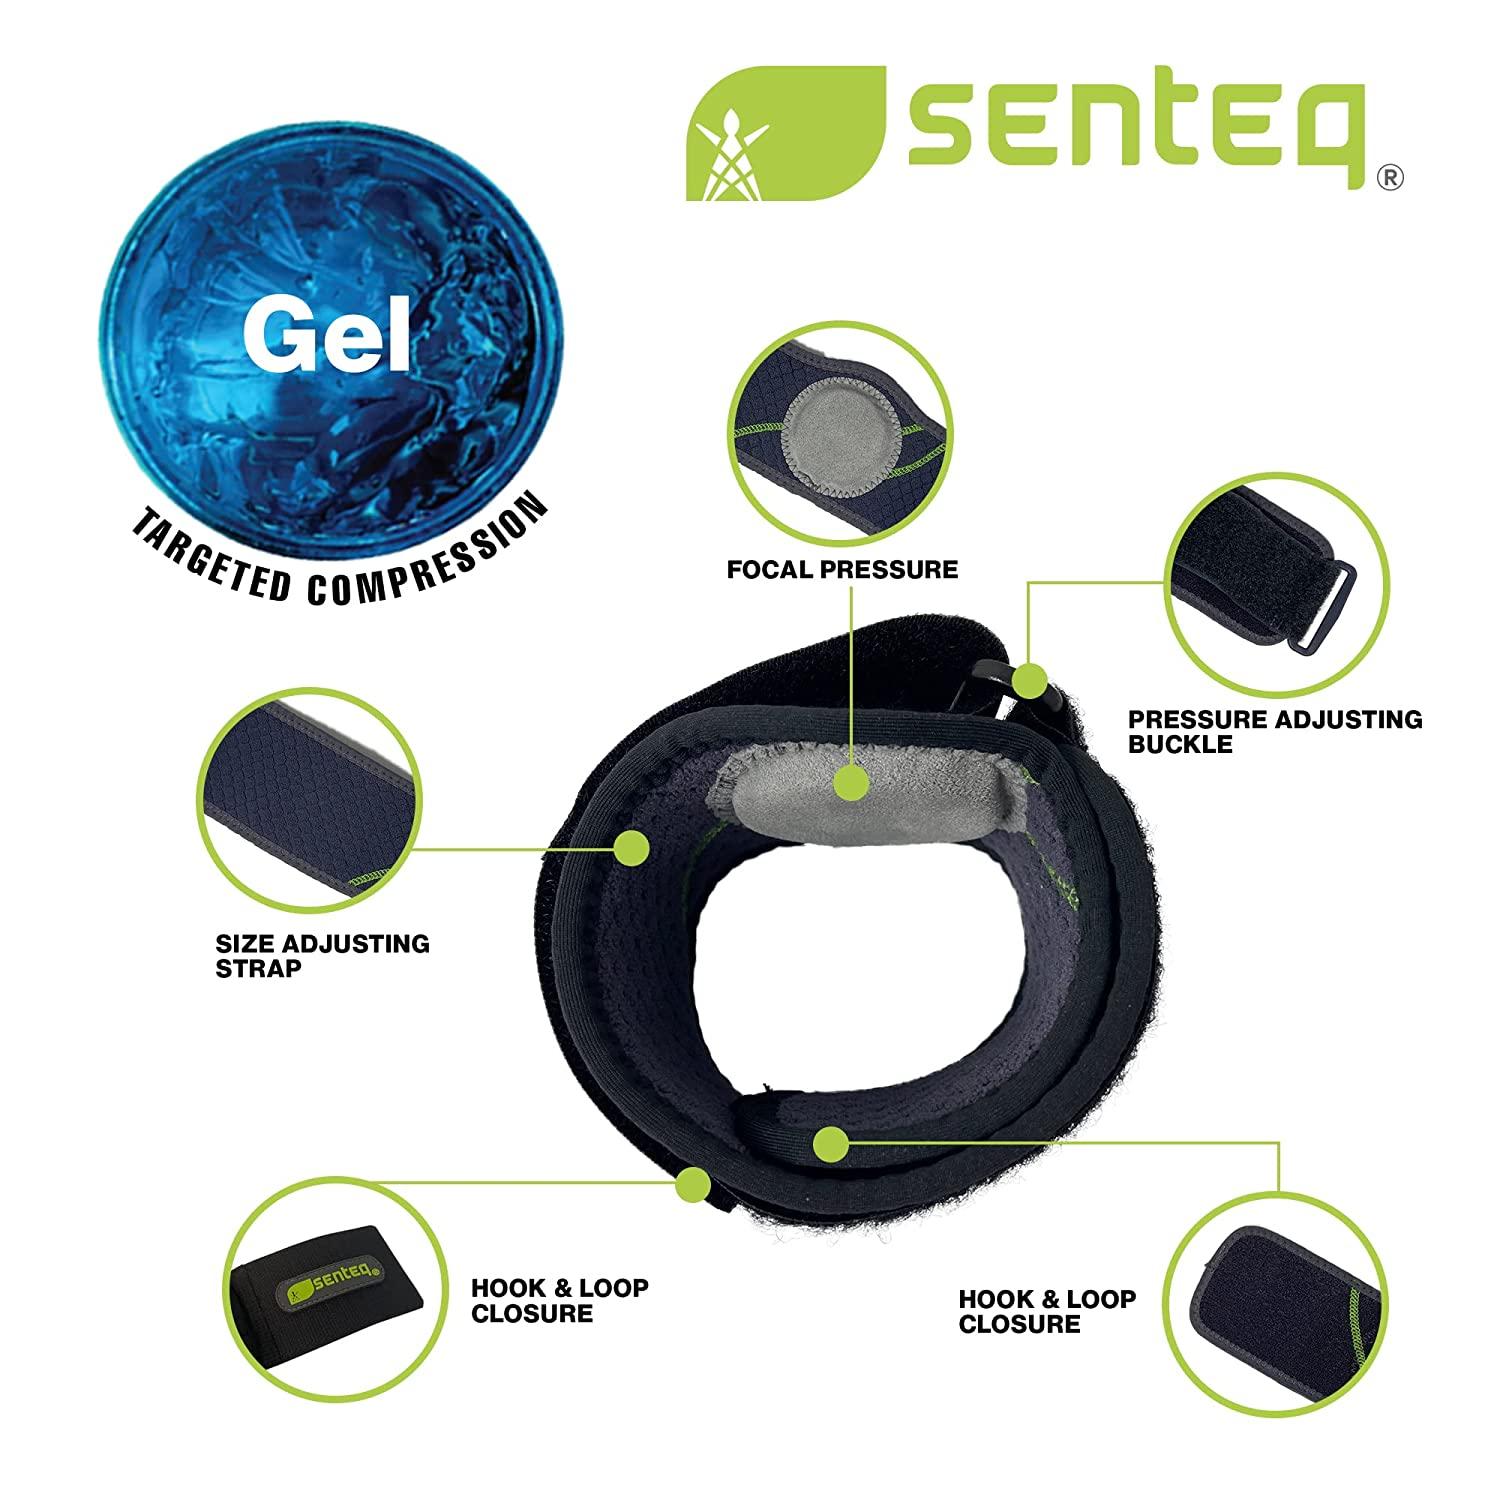 Elbow Support Brace by SENTEQ, Medical Grade, US FDA Approved. Tennis &  Golfer's Elbow Strap Band - Relieves Tendonitis and Forearm Pain